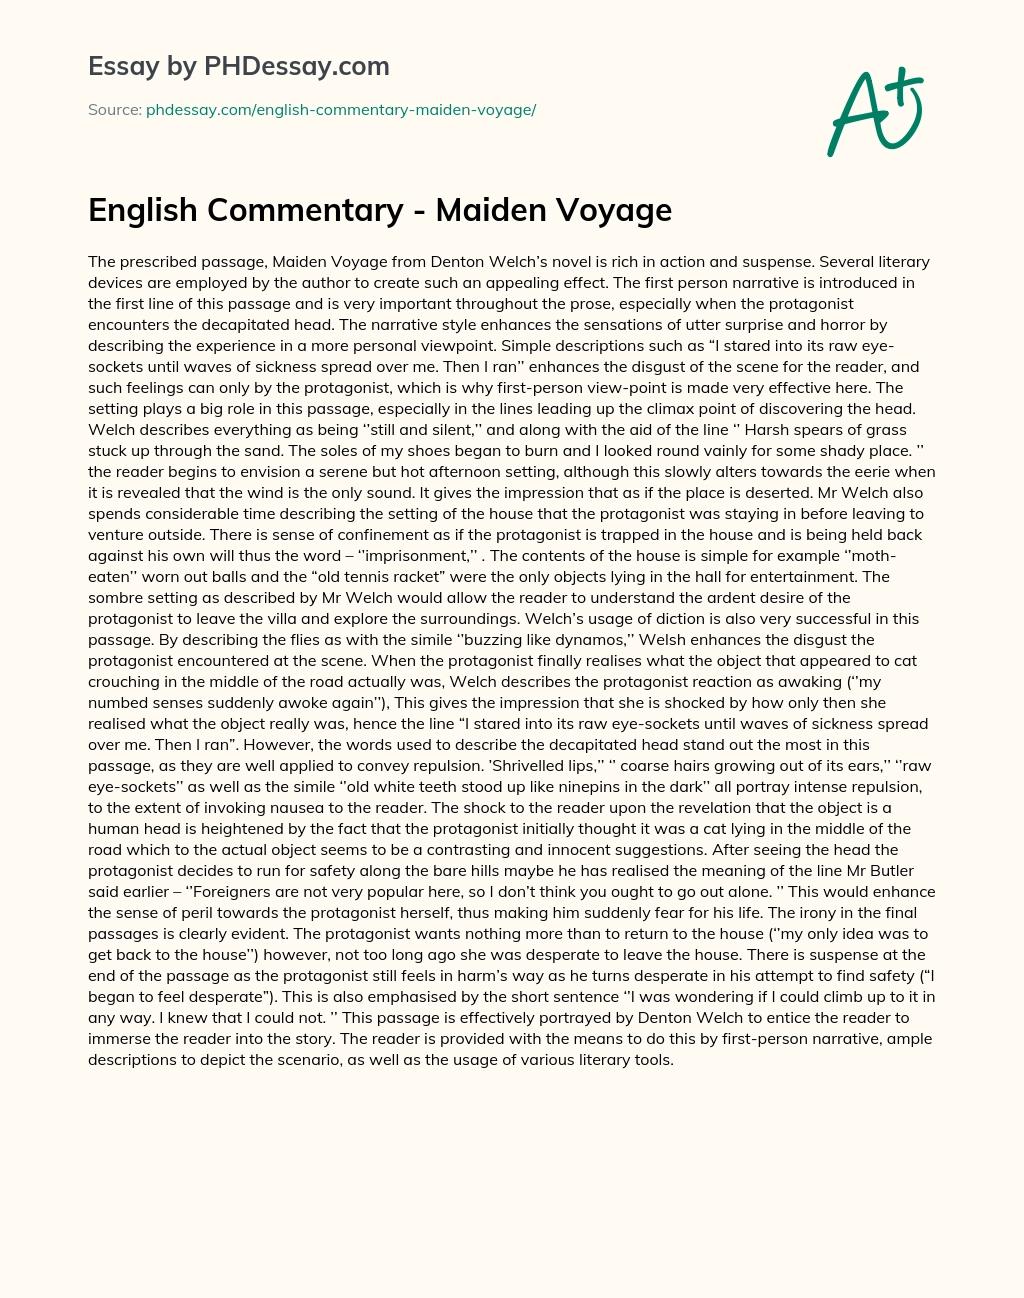 English Commentary – Maiden Voyage essay